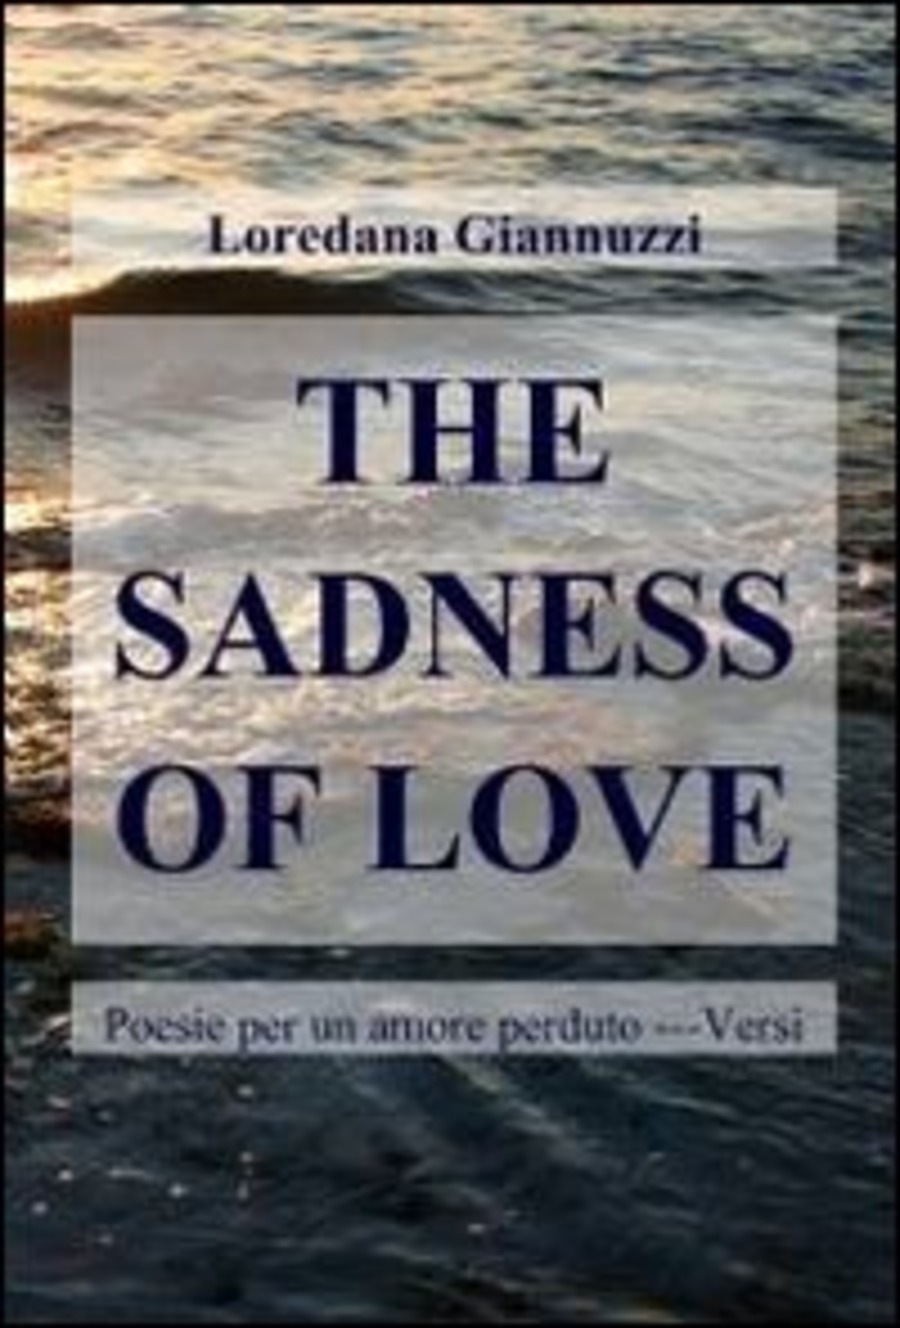 The sadness of love